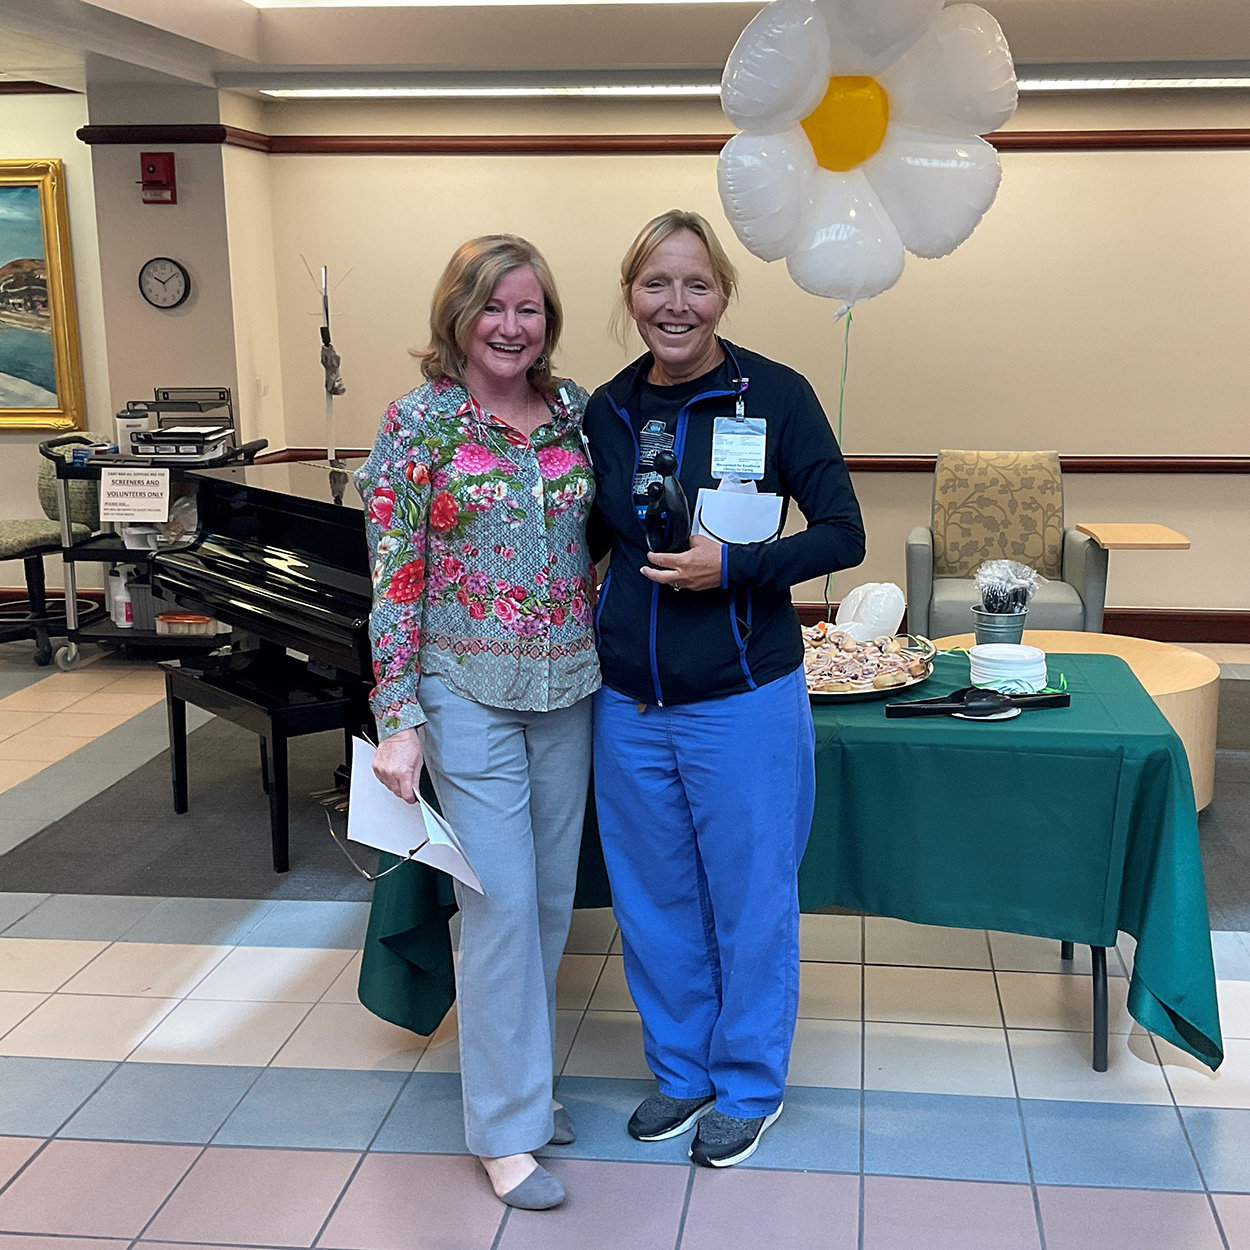 Sue Sheaffer, a nurse at Grand View Health for nearly four decades, is the organization’s first recipient of the DAISY Award for extraordinary nurses.